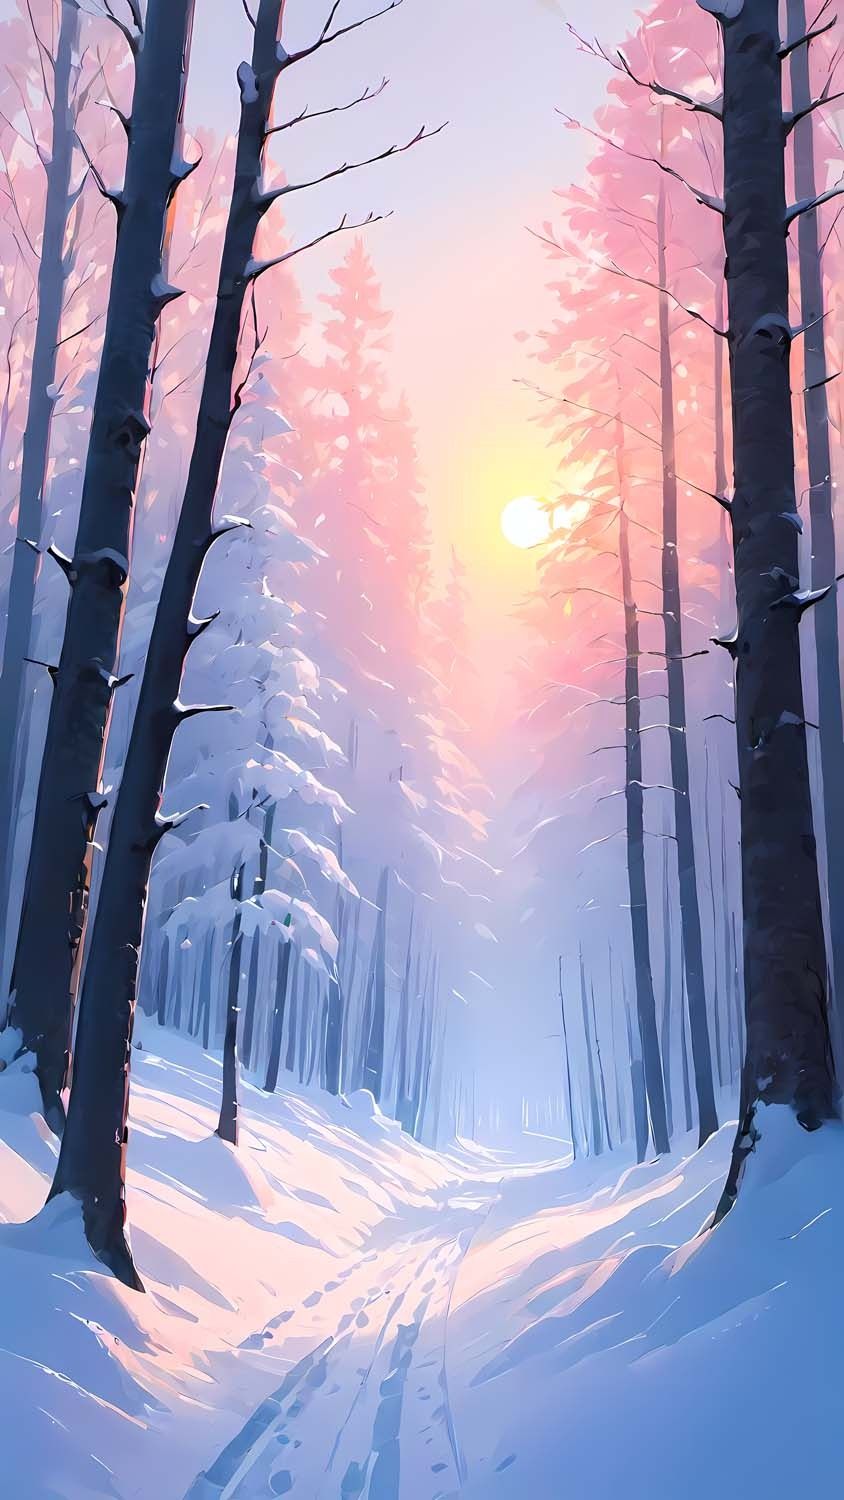 Snowy Forest iPhone Wallpaper  iPhone Wallpapers